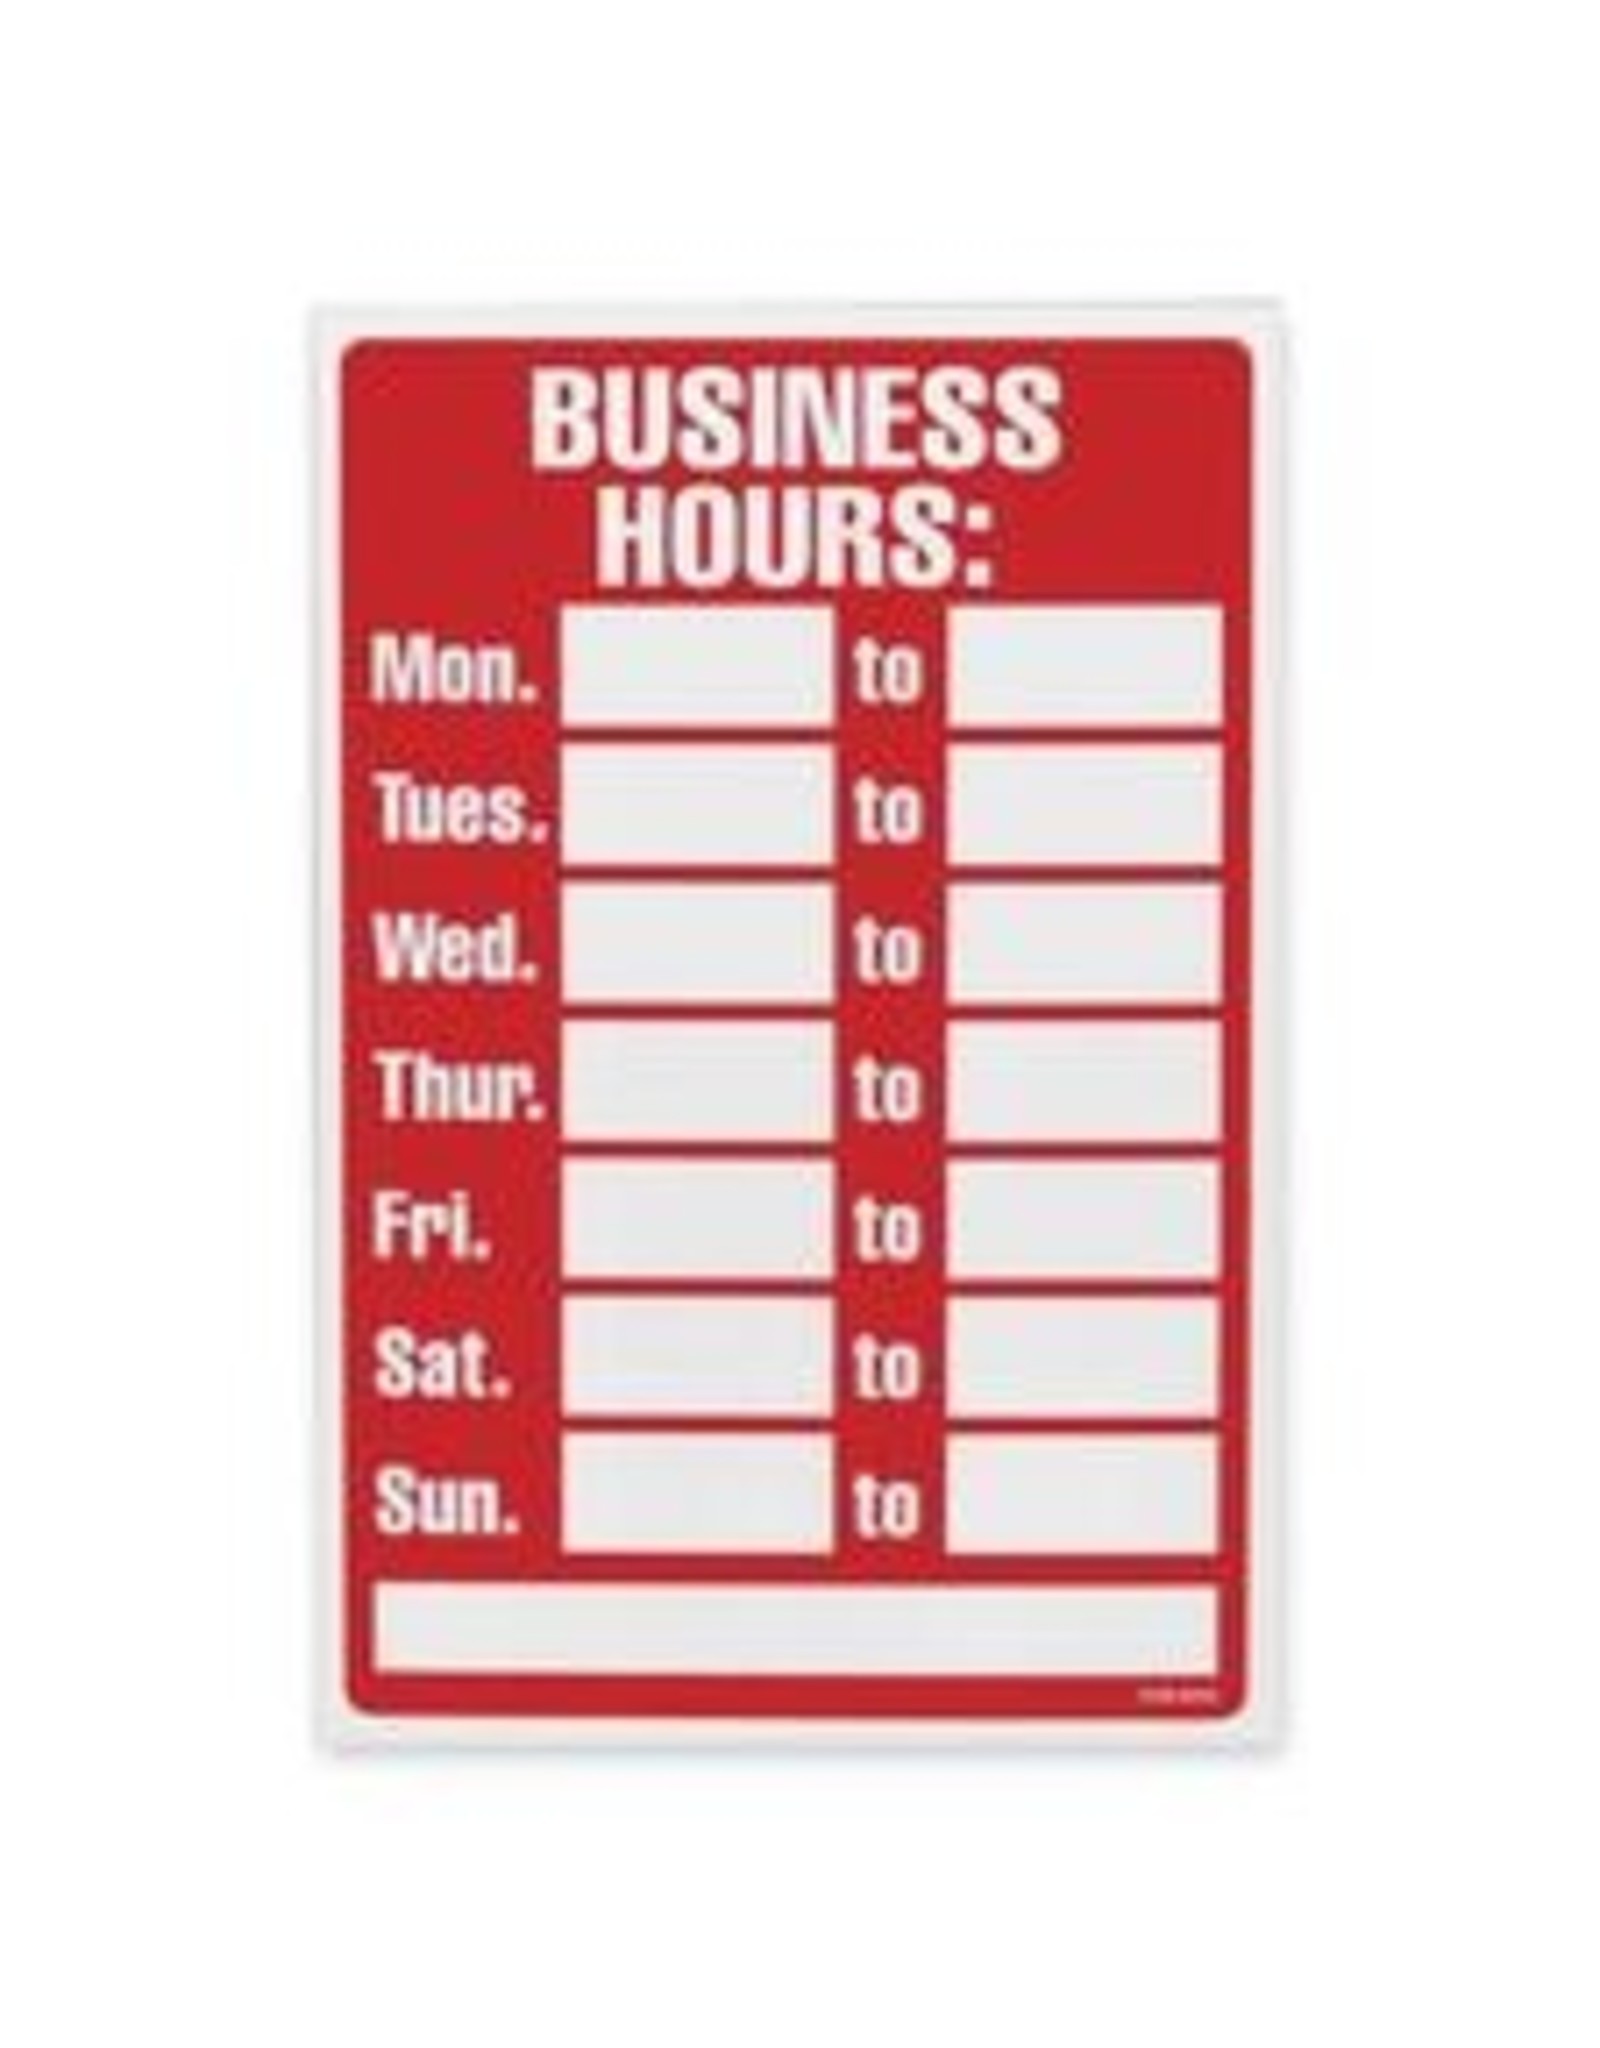 SIGN 12x8 RD/WT*BUSINESS HOURS